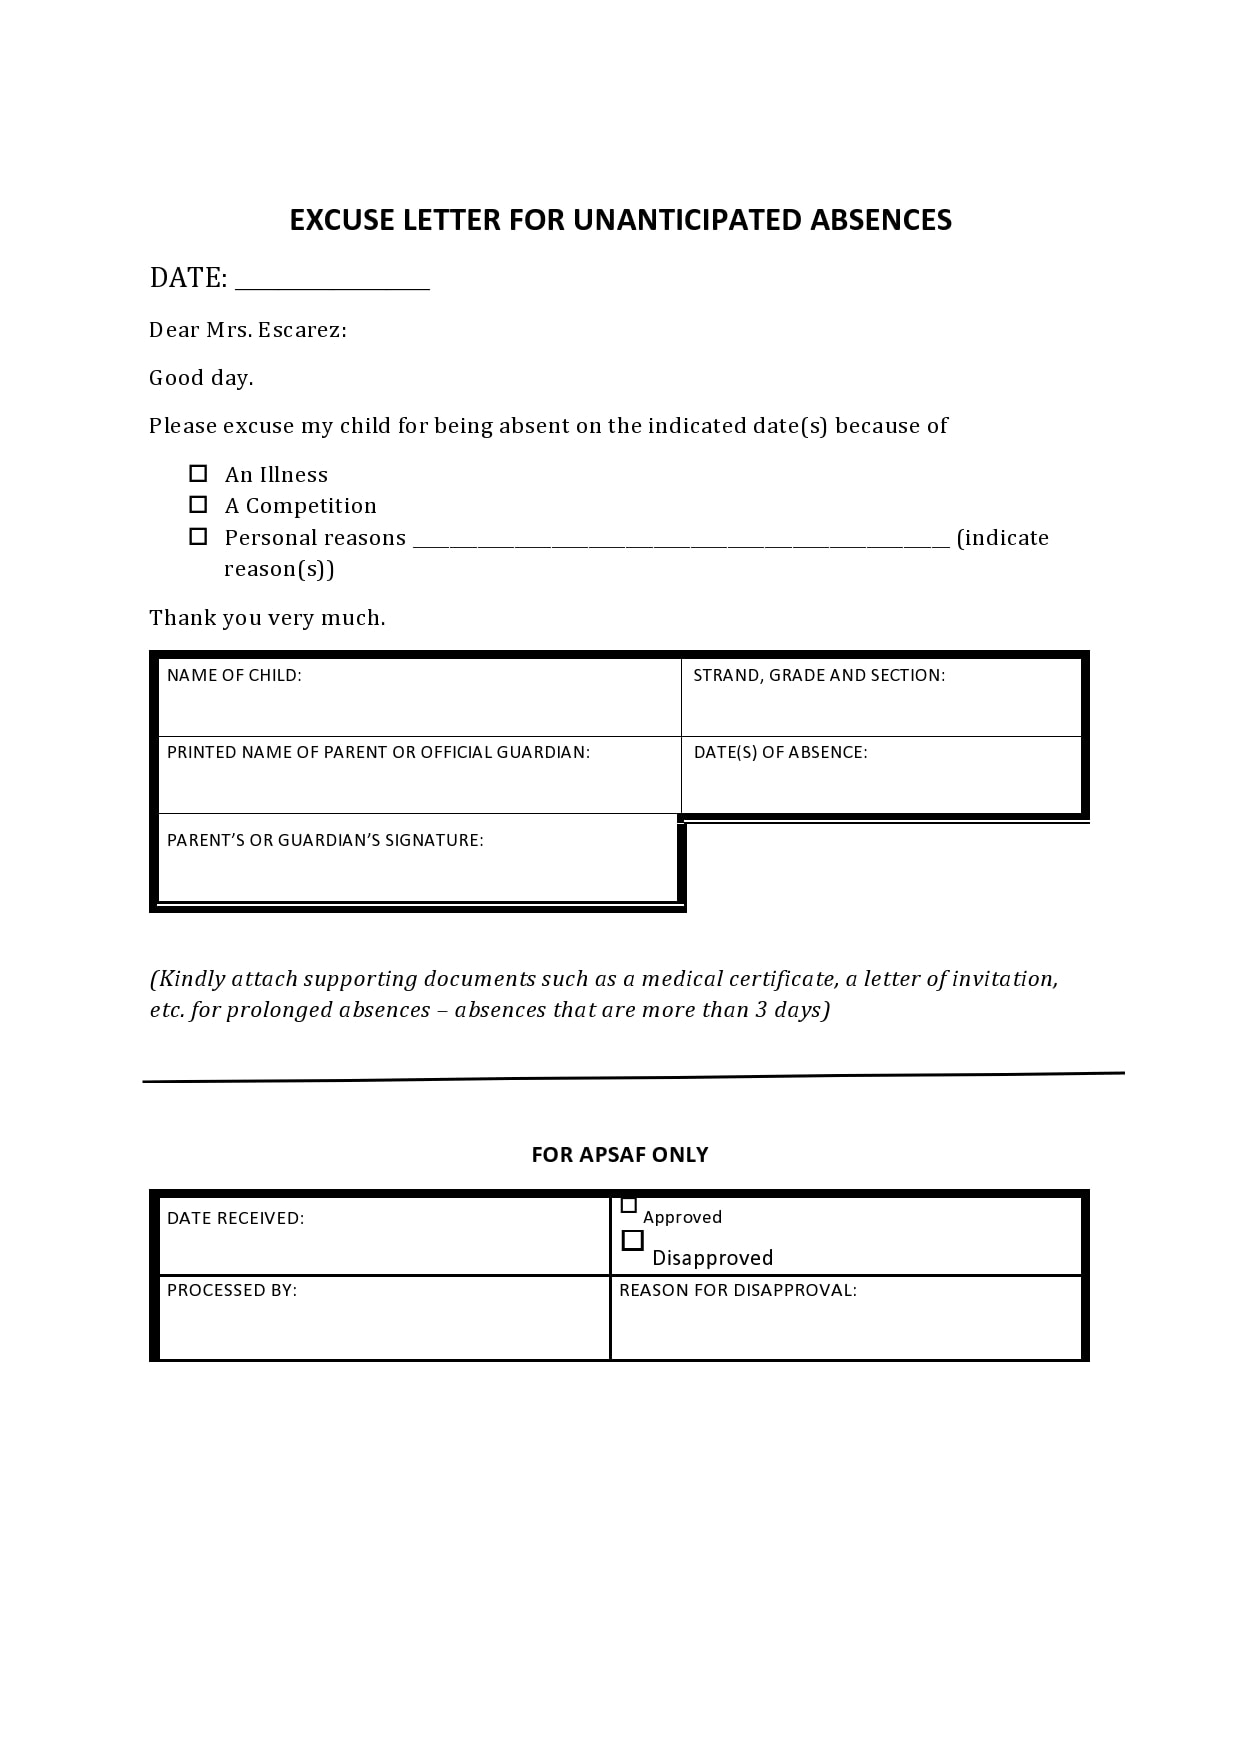 21 Free Excuse Letters (Absent Notes For School) - TemplateArchive Regarding School Absence Note Template Free